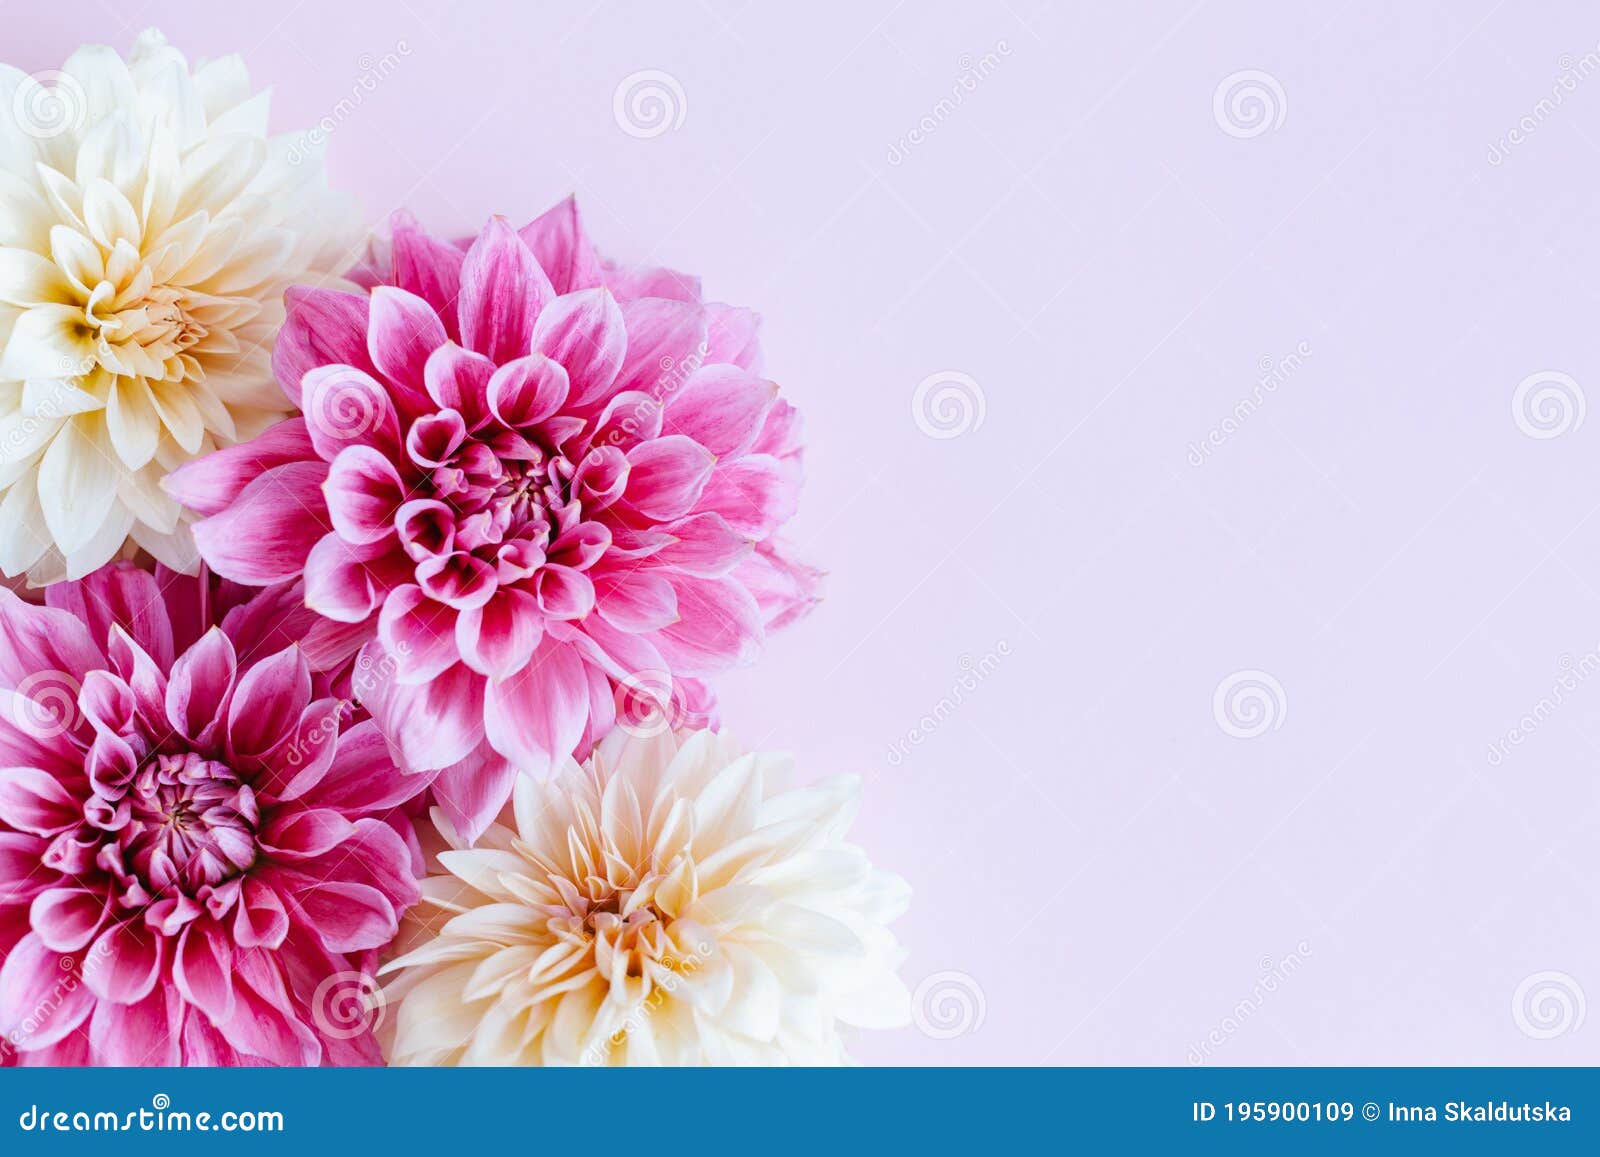 Amazing Dahlia Flowers in Pink and Cream Colors on a Pink Pastel ...